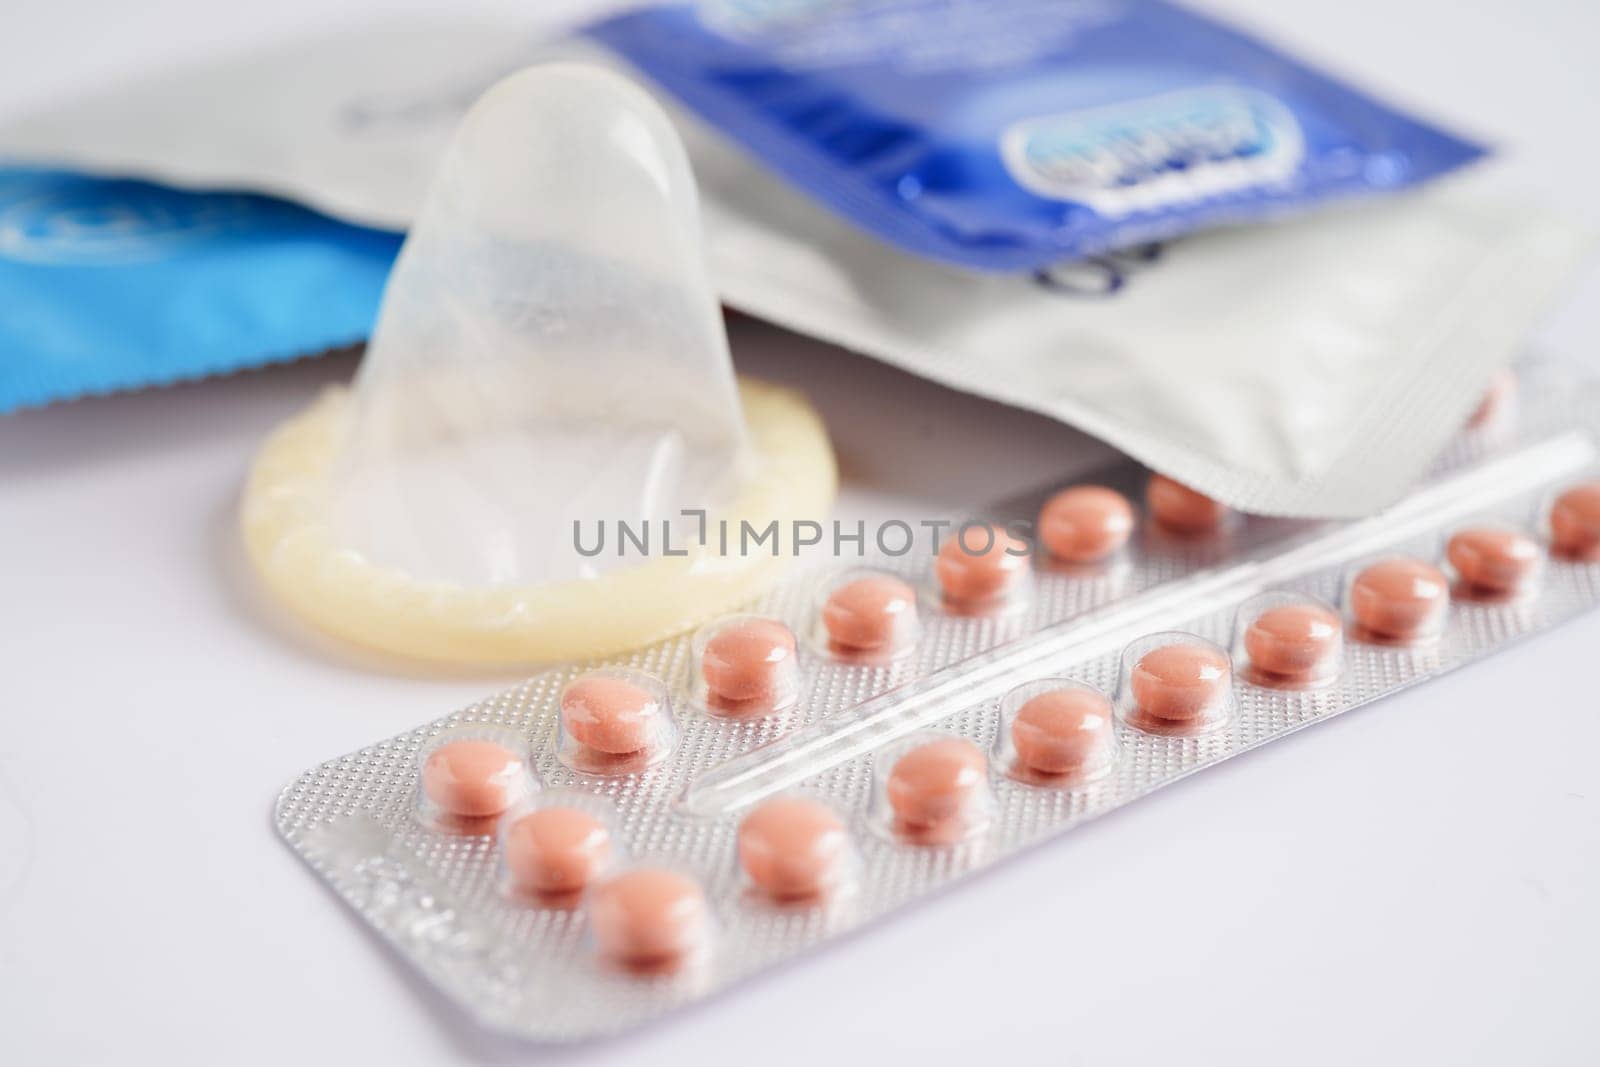 Condom and birth control pills for prevent infection, safe sex  and birth control.